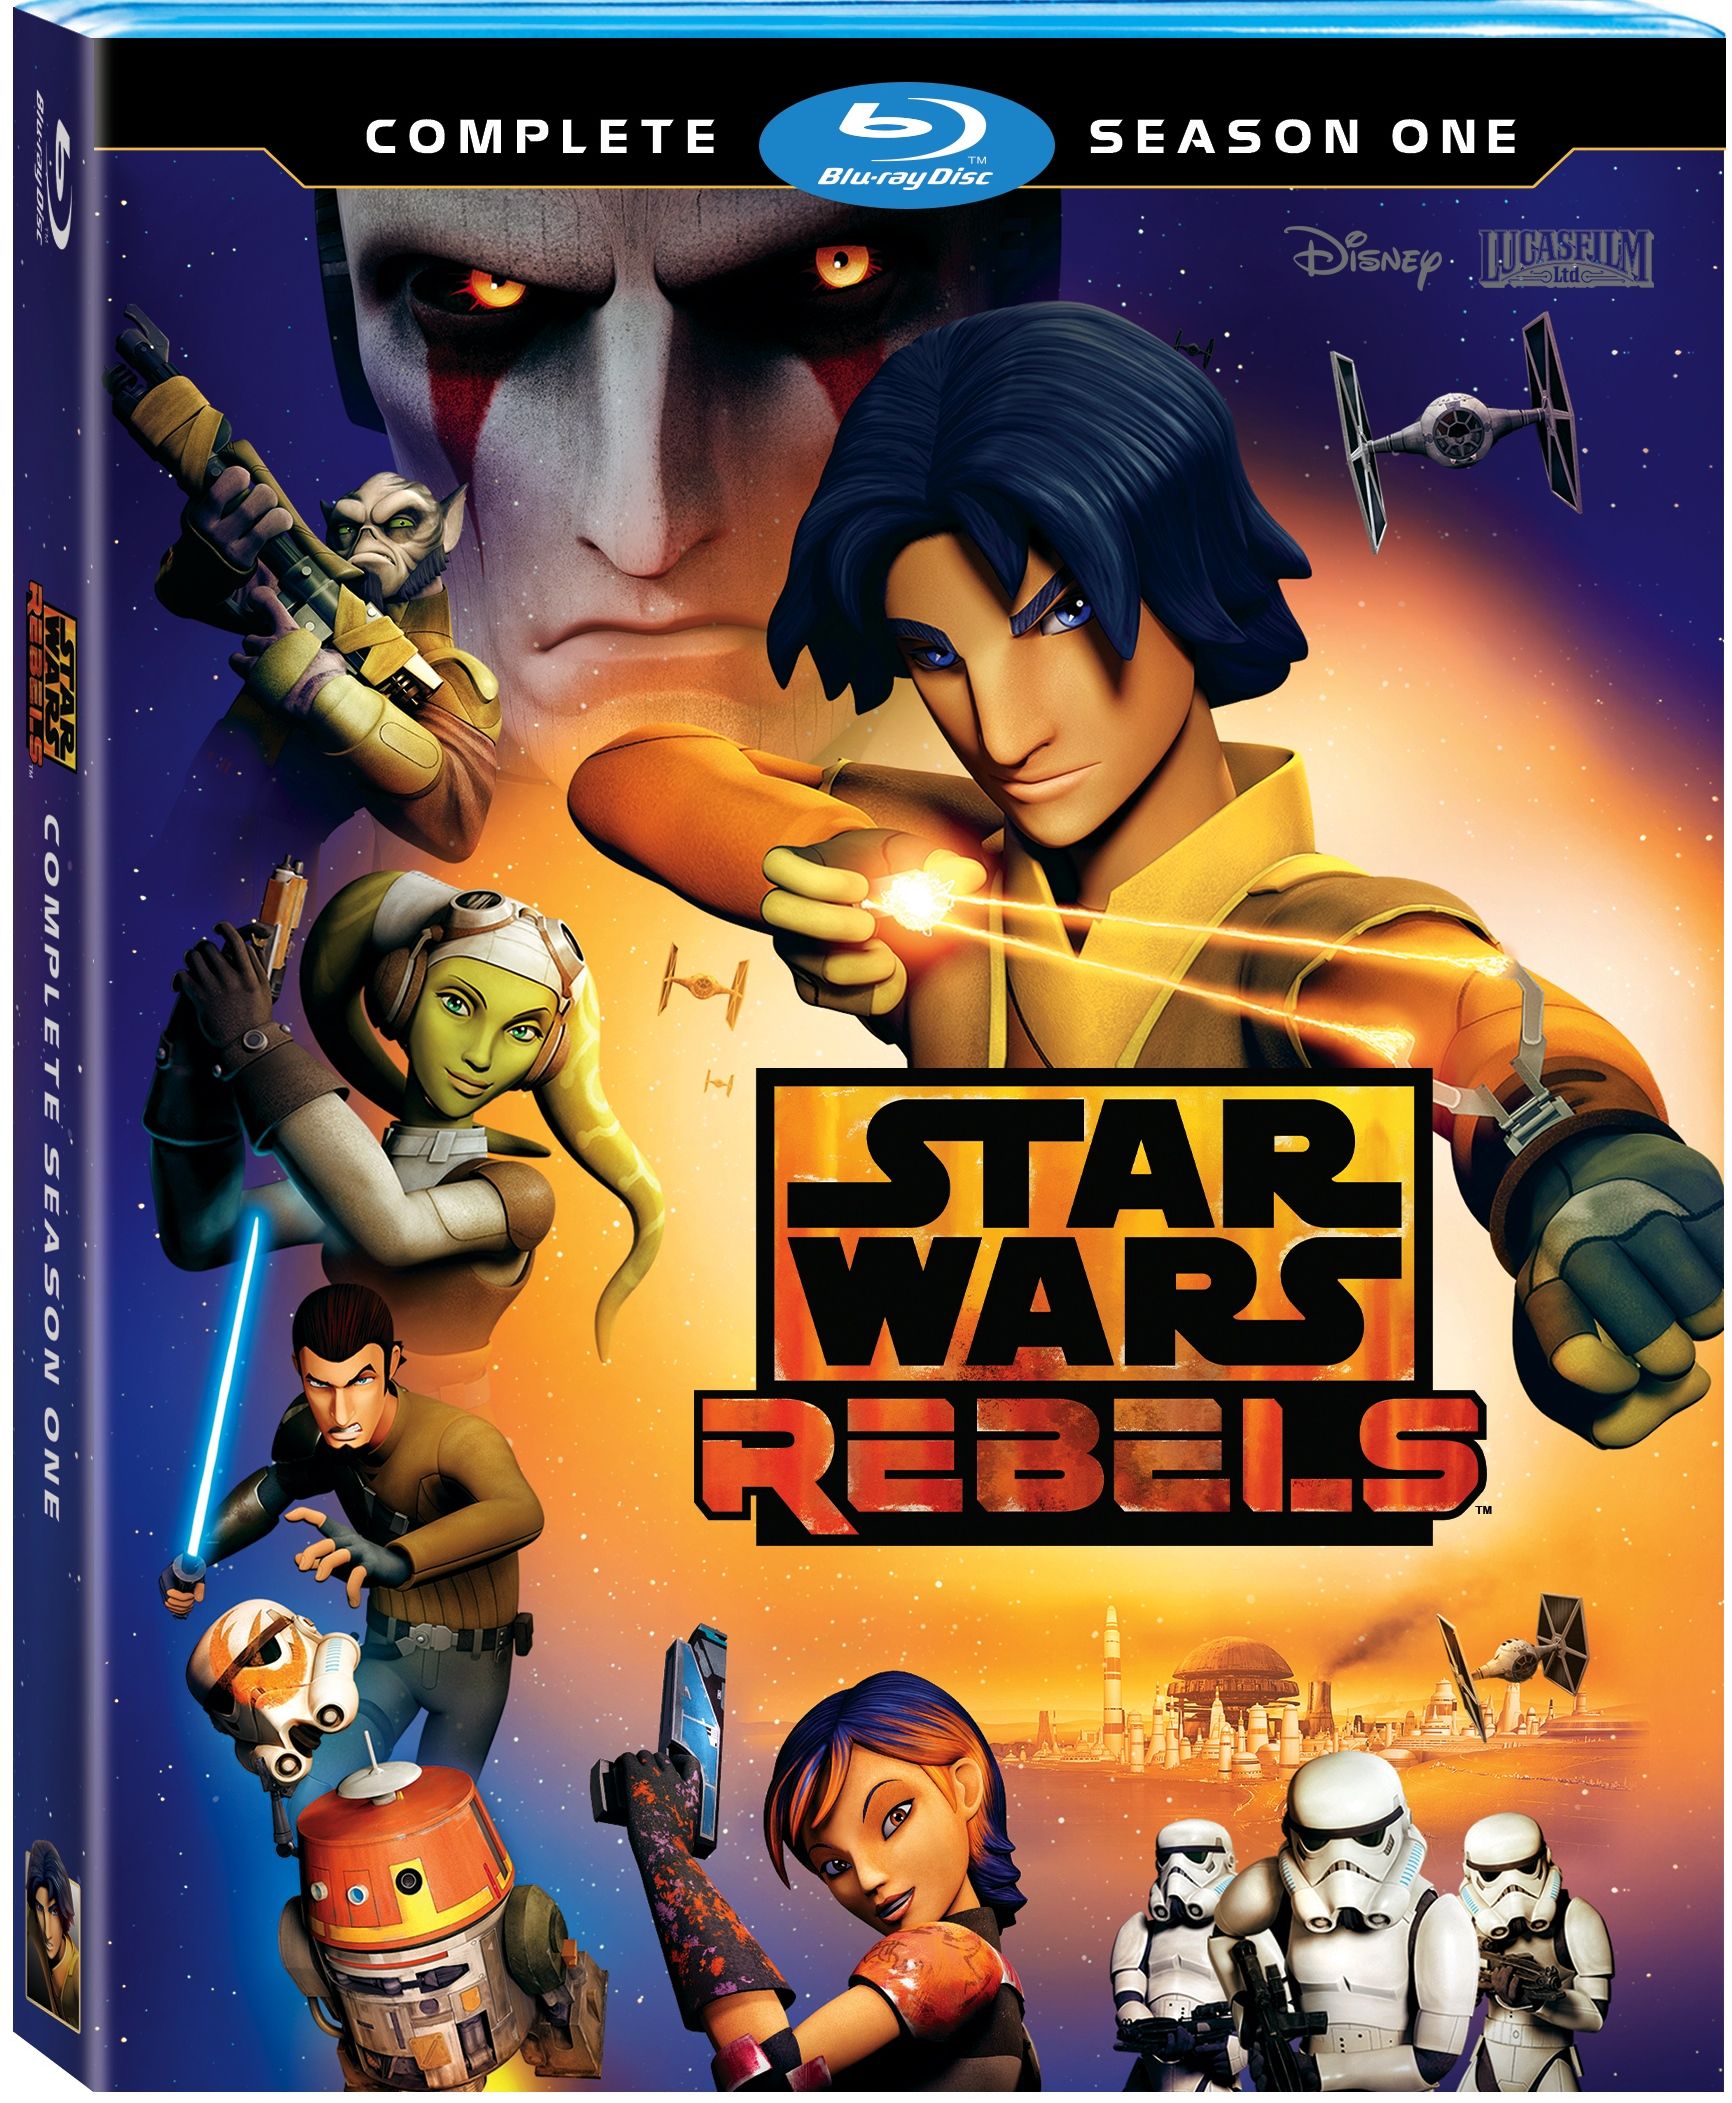 Season One of Star Wars Rebels Out on Blu-ray 9/1